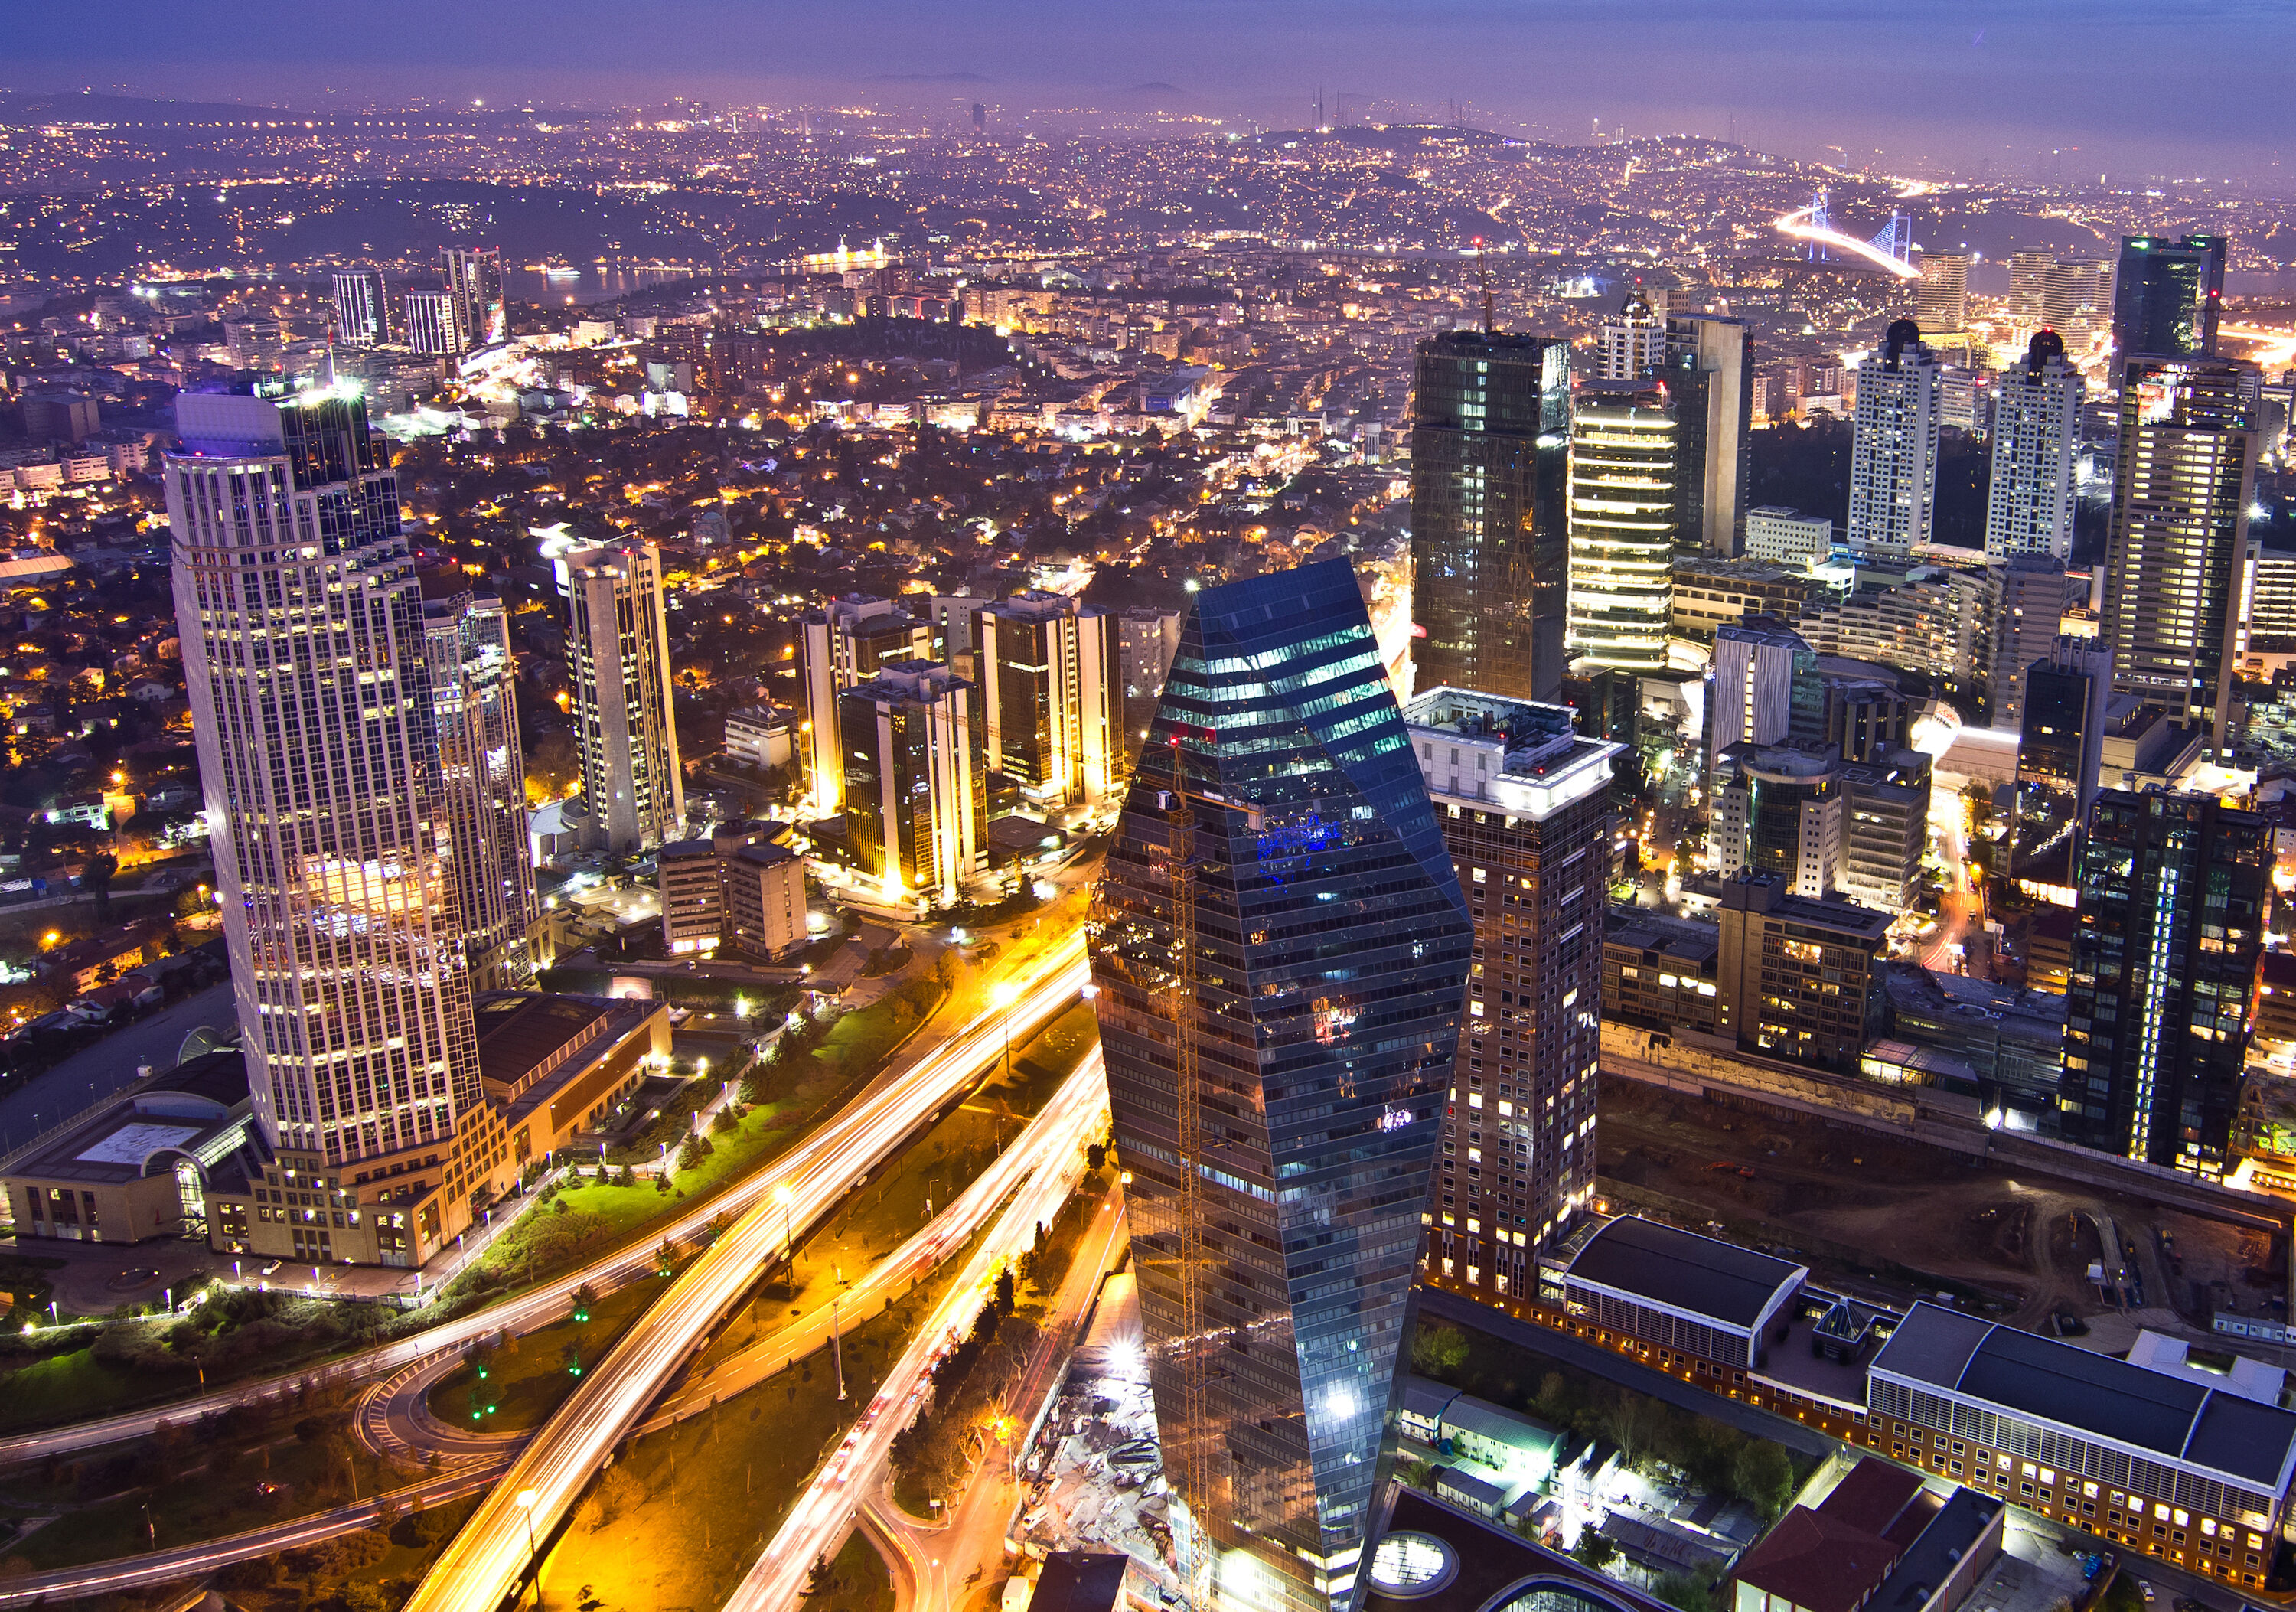 https://en.m.wikivoyage.org/wiki/File:View_of_Levent_financial_district_from_Istanbul_Sapphire.jpg